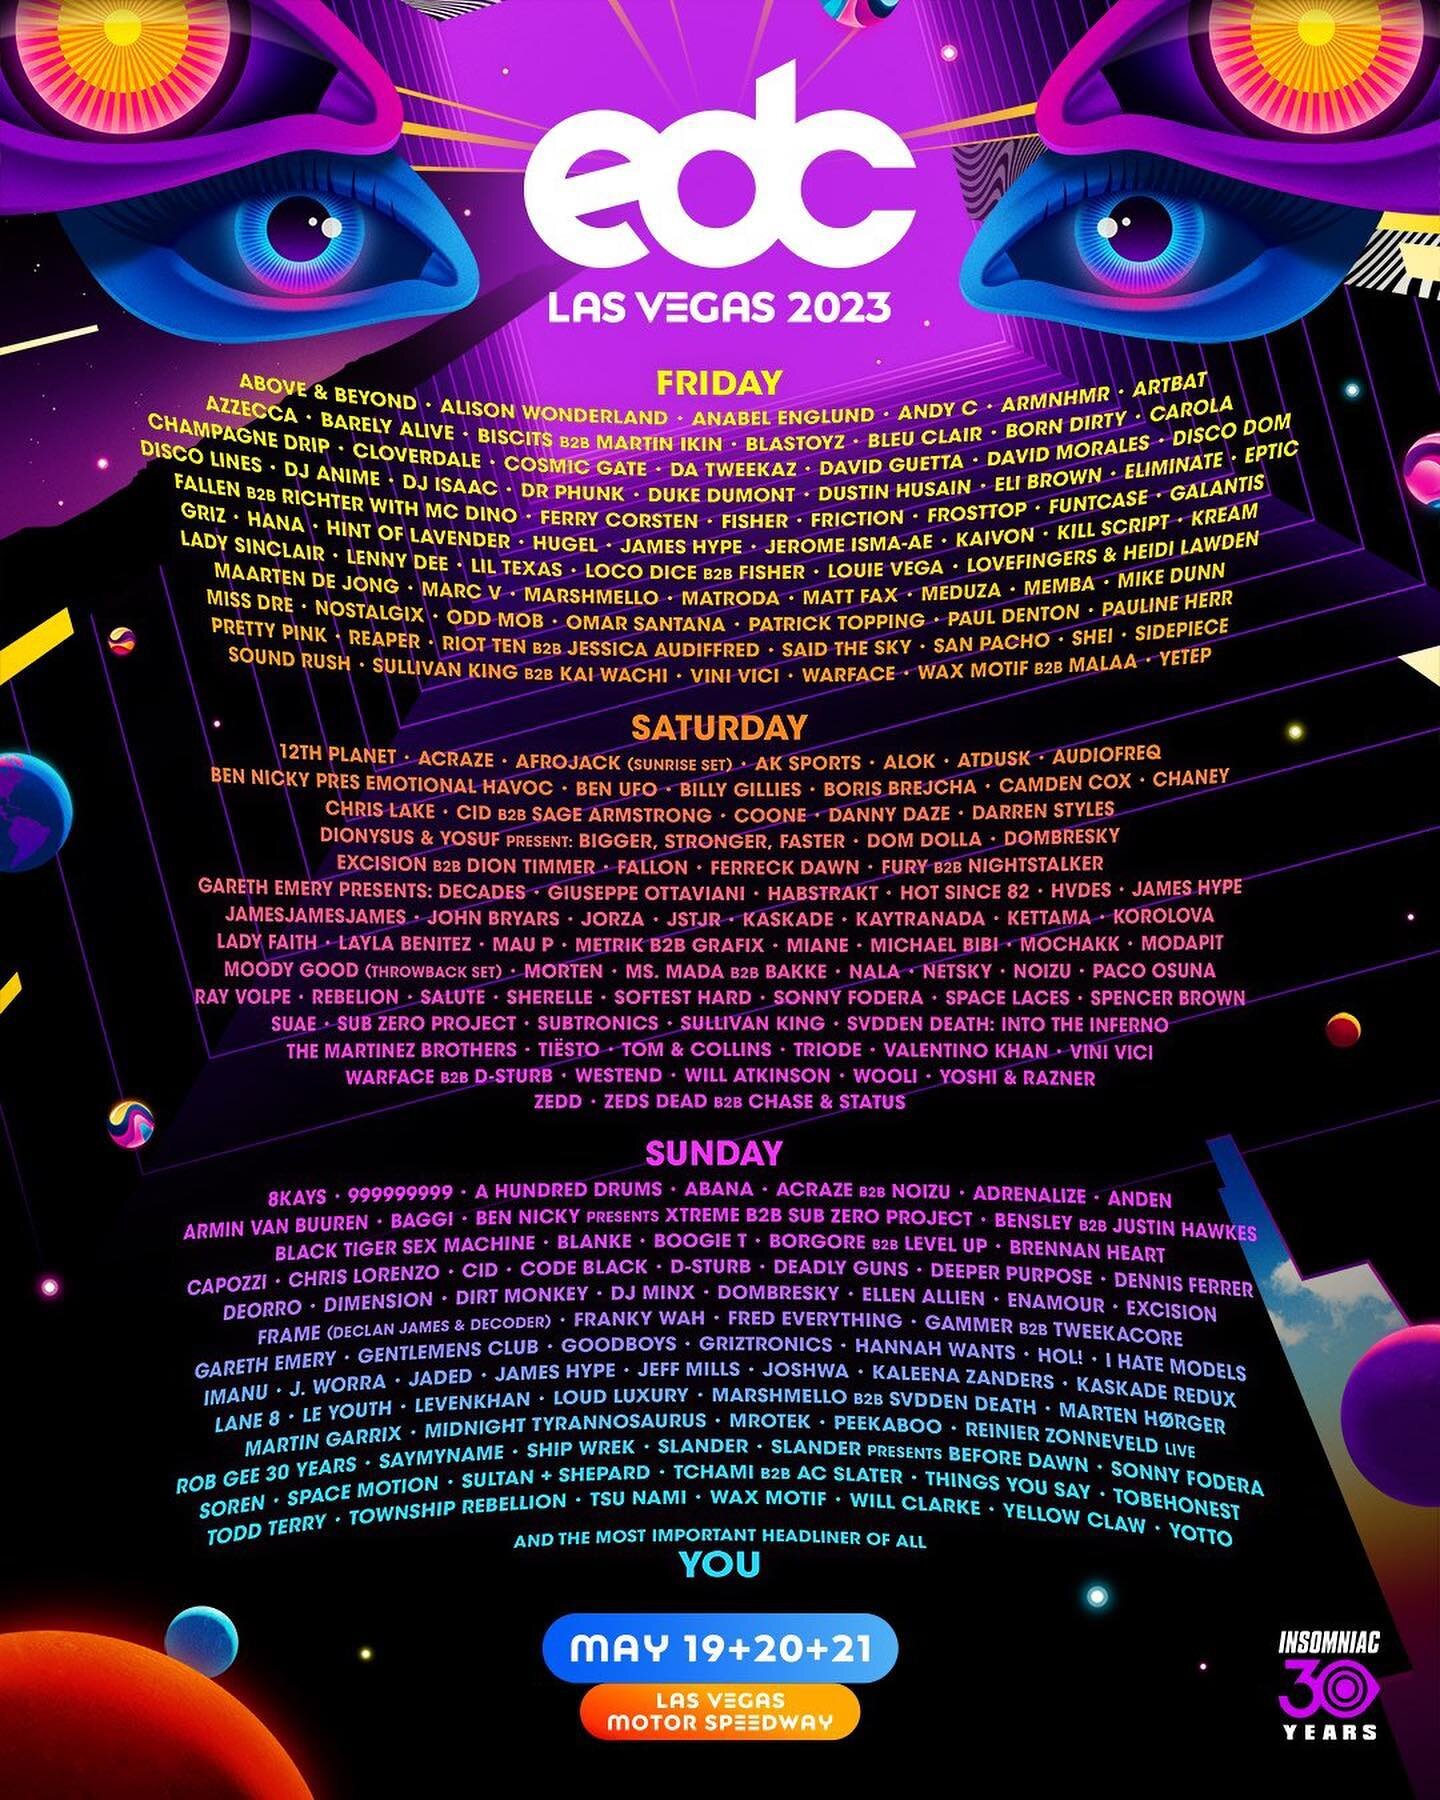 I CANT BELIEVE IM TYPING THIS OUT, BUT I&rsquo;M ON THE EDC LAS VEGAS LINE-UP THIS YEAR. I WORKED SO HARD AND DREAMT ABOUT THIS FOR SO LONG. I CANT BELIEVE IM PLAYING AT THE FIRST FESTIVAL I&rsquo;VE EVER ATTENDED. I GOT ALL THE FEELS! THANK YOU INSO